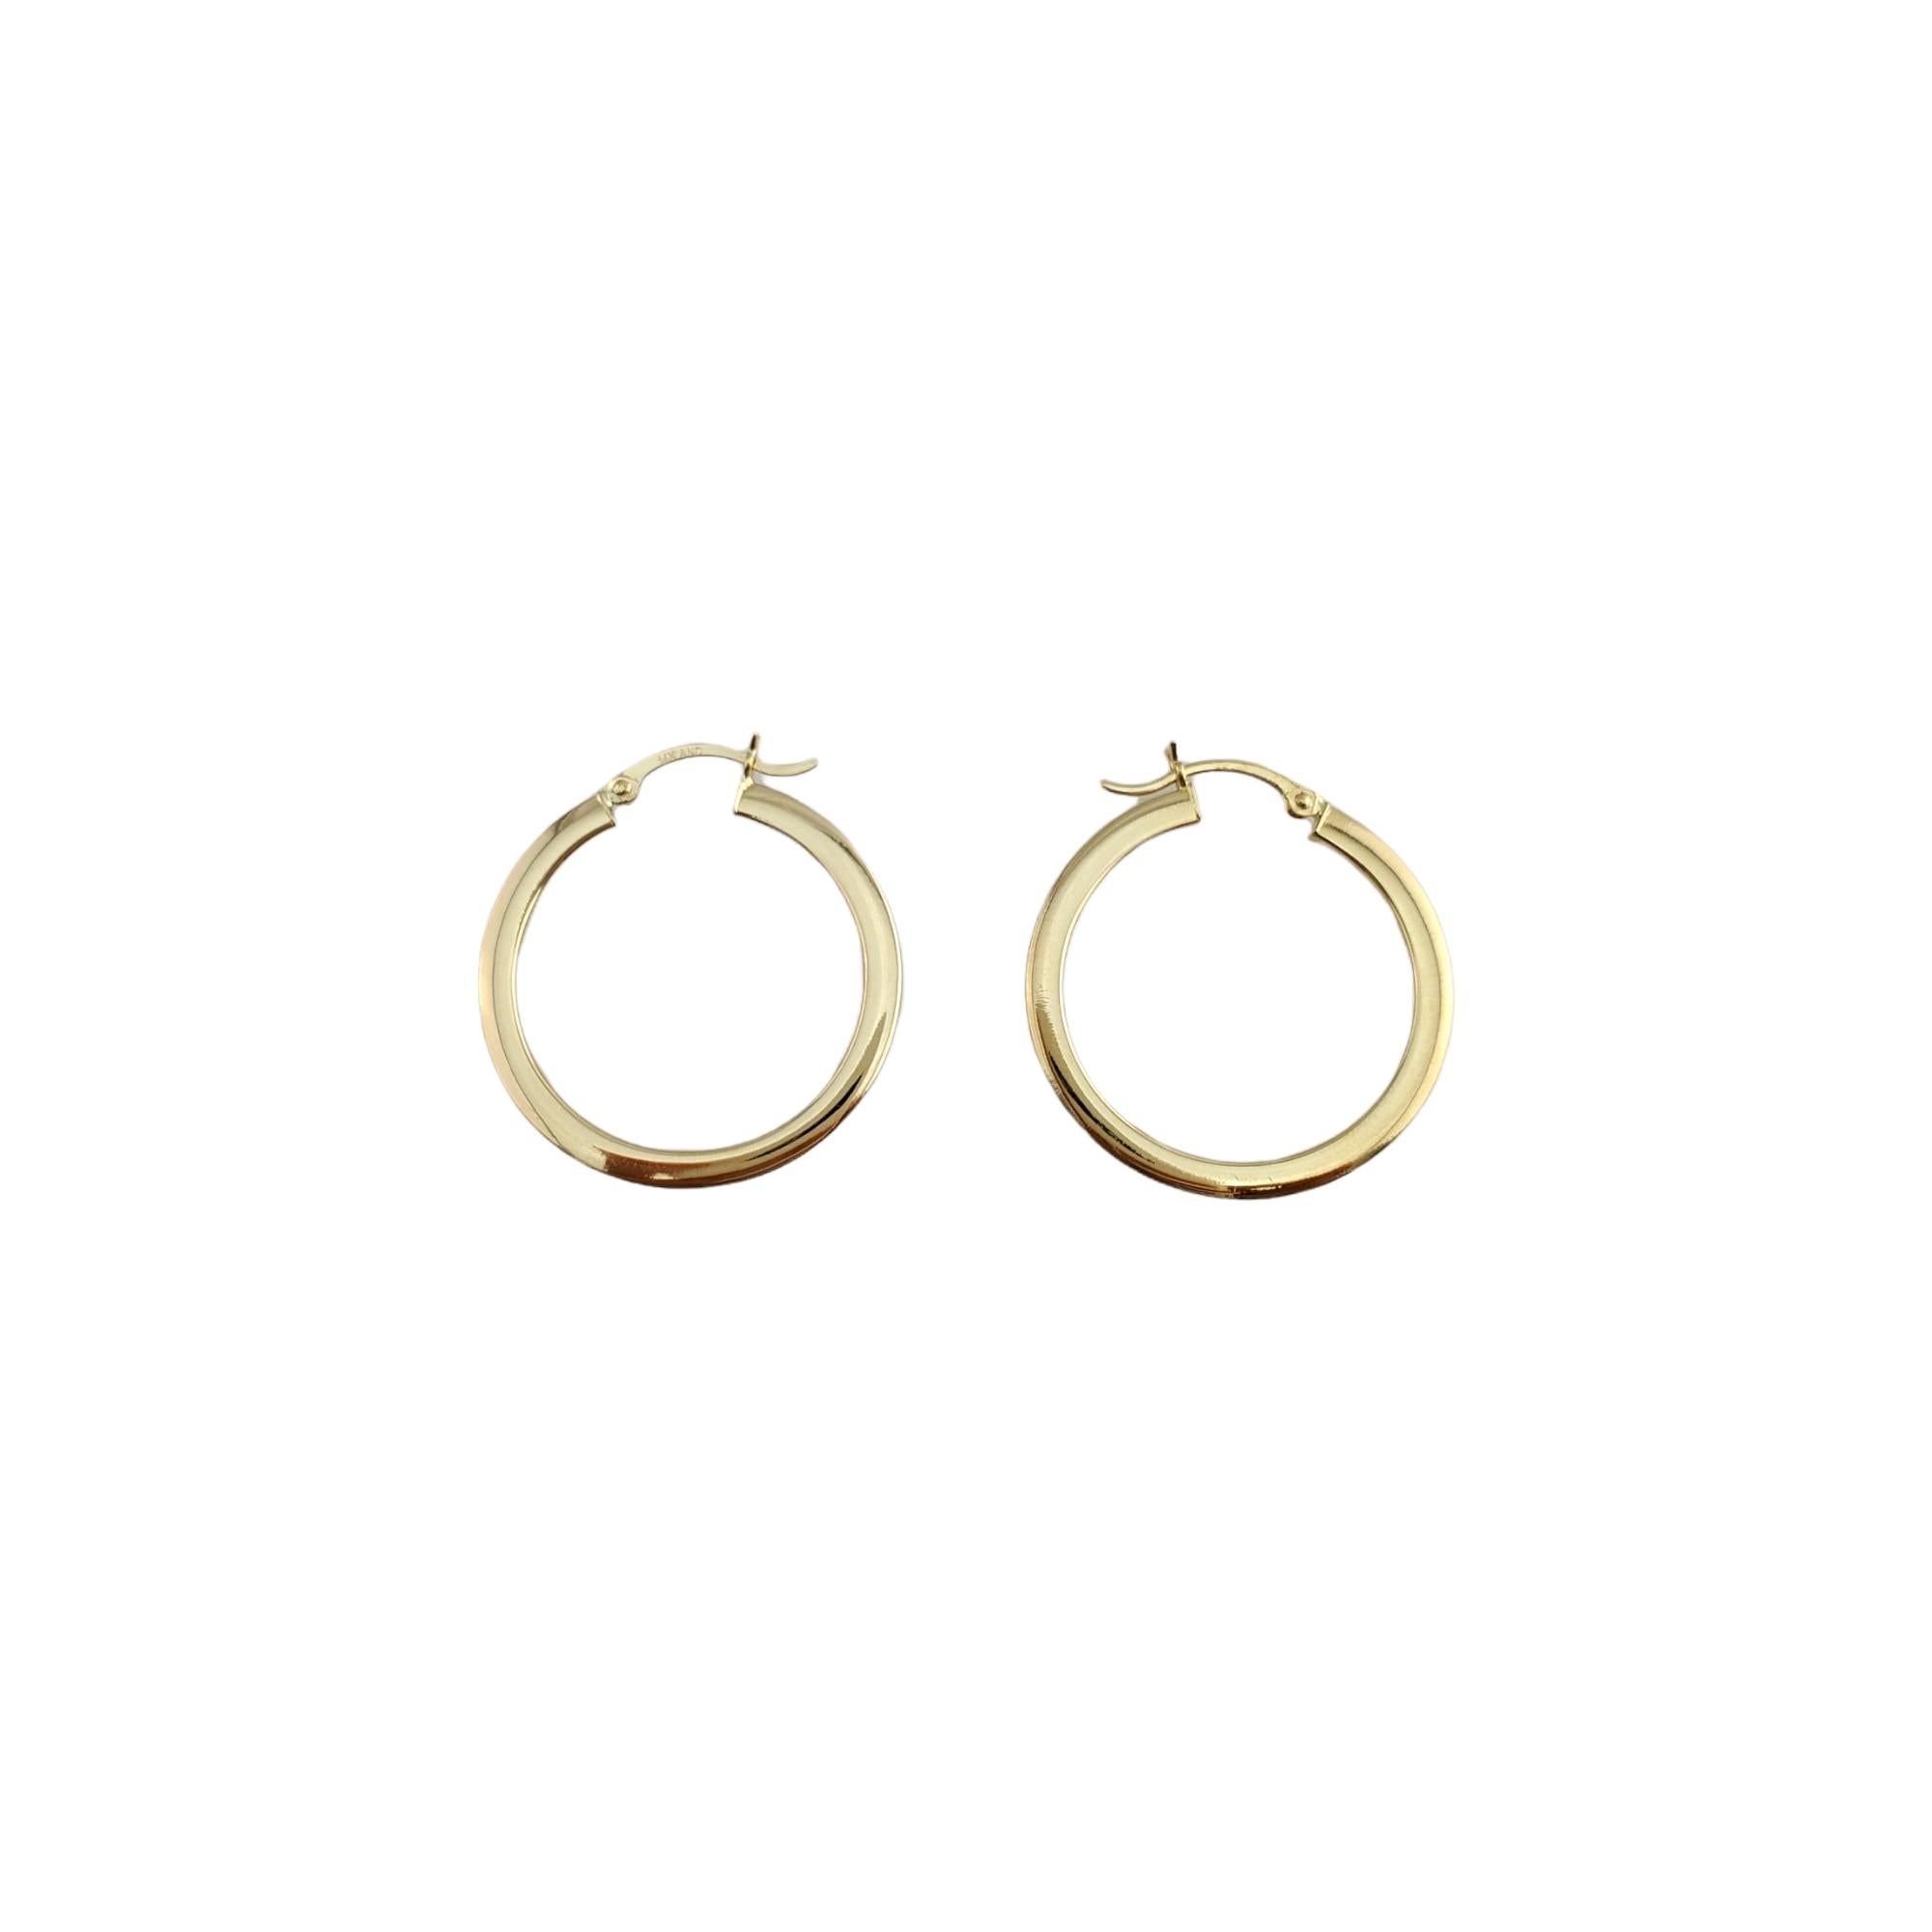 14K Yellow Gold Hoops With Clear Stone

These gorgeous 14K yellow gold hoops feature a meticulous design with clear stones.

Size: 31.8 mm X 29.26 mm 

Weight: 4.6 g/ 2.9 dwt

Hallmark: 14K AND

Very good condition, professionally polished.

Will